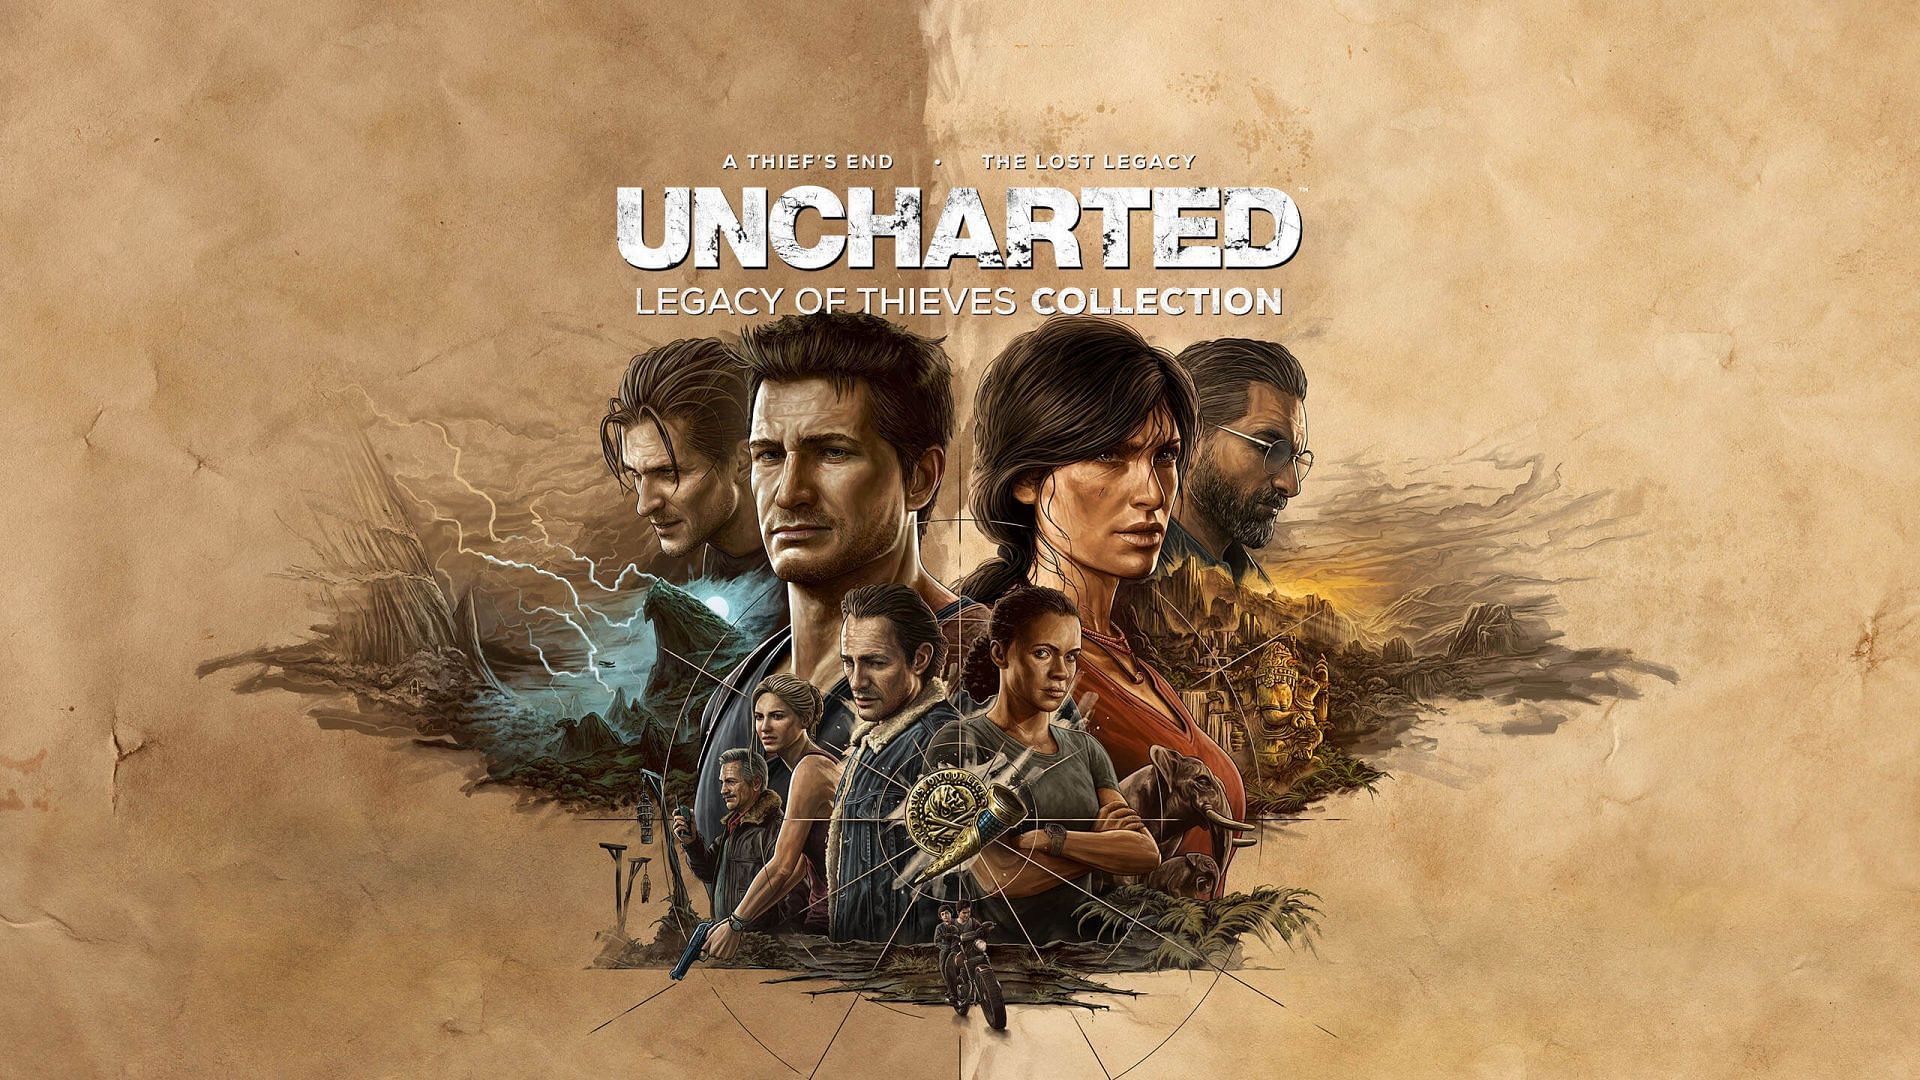 Uncharted Legacy of Thieves Collection (Image via PlayStation)